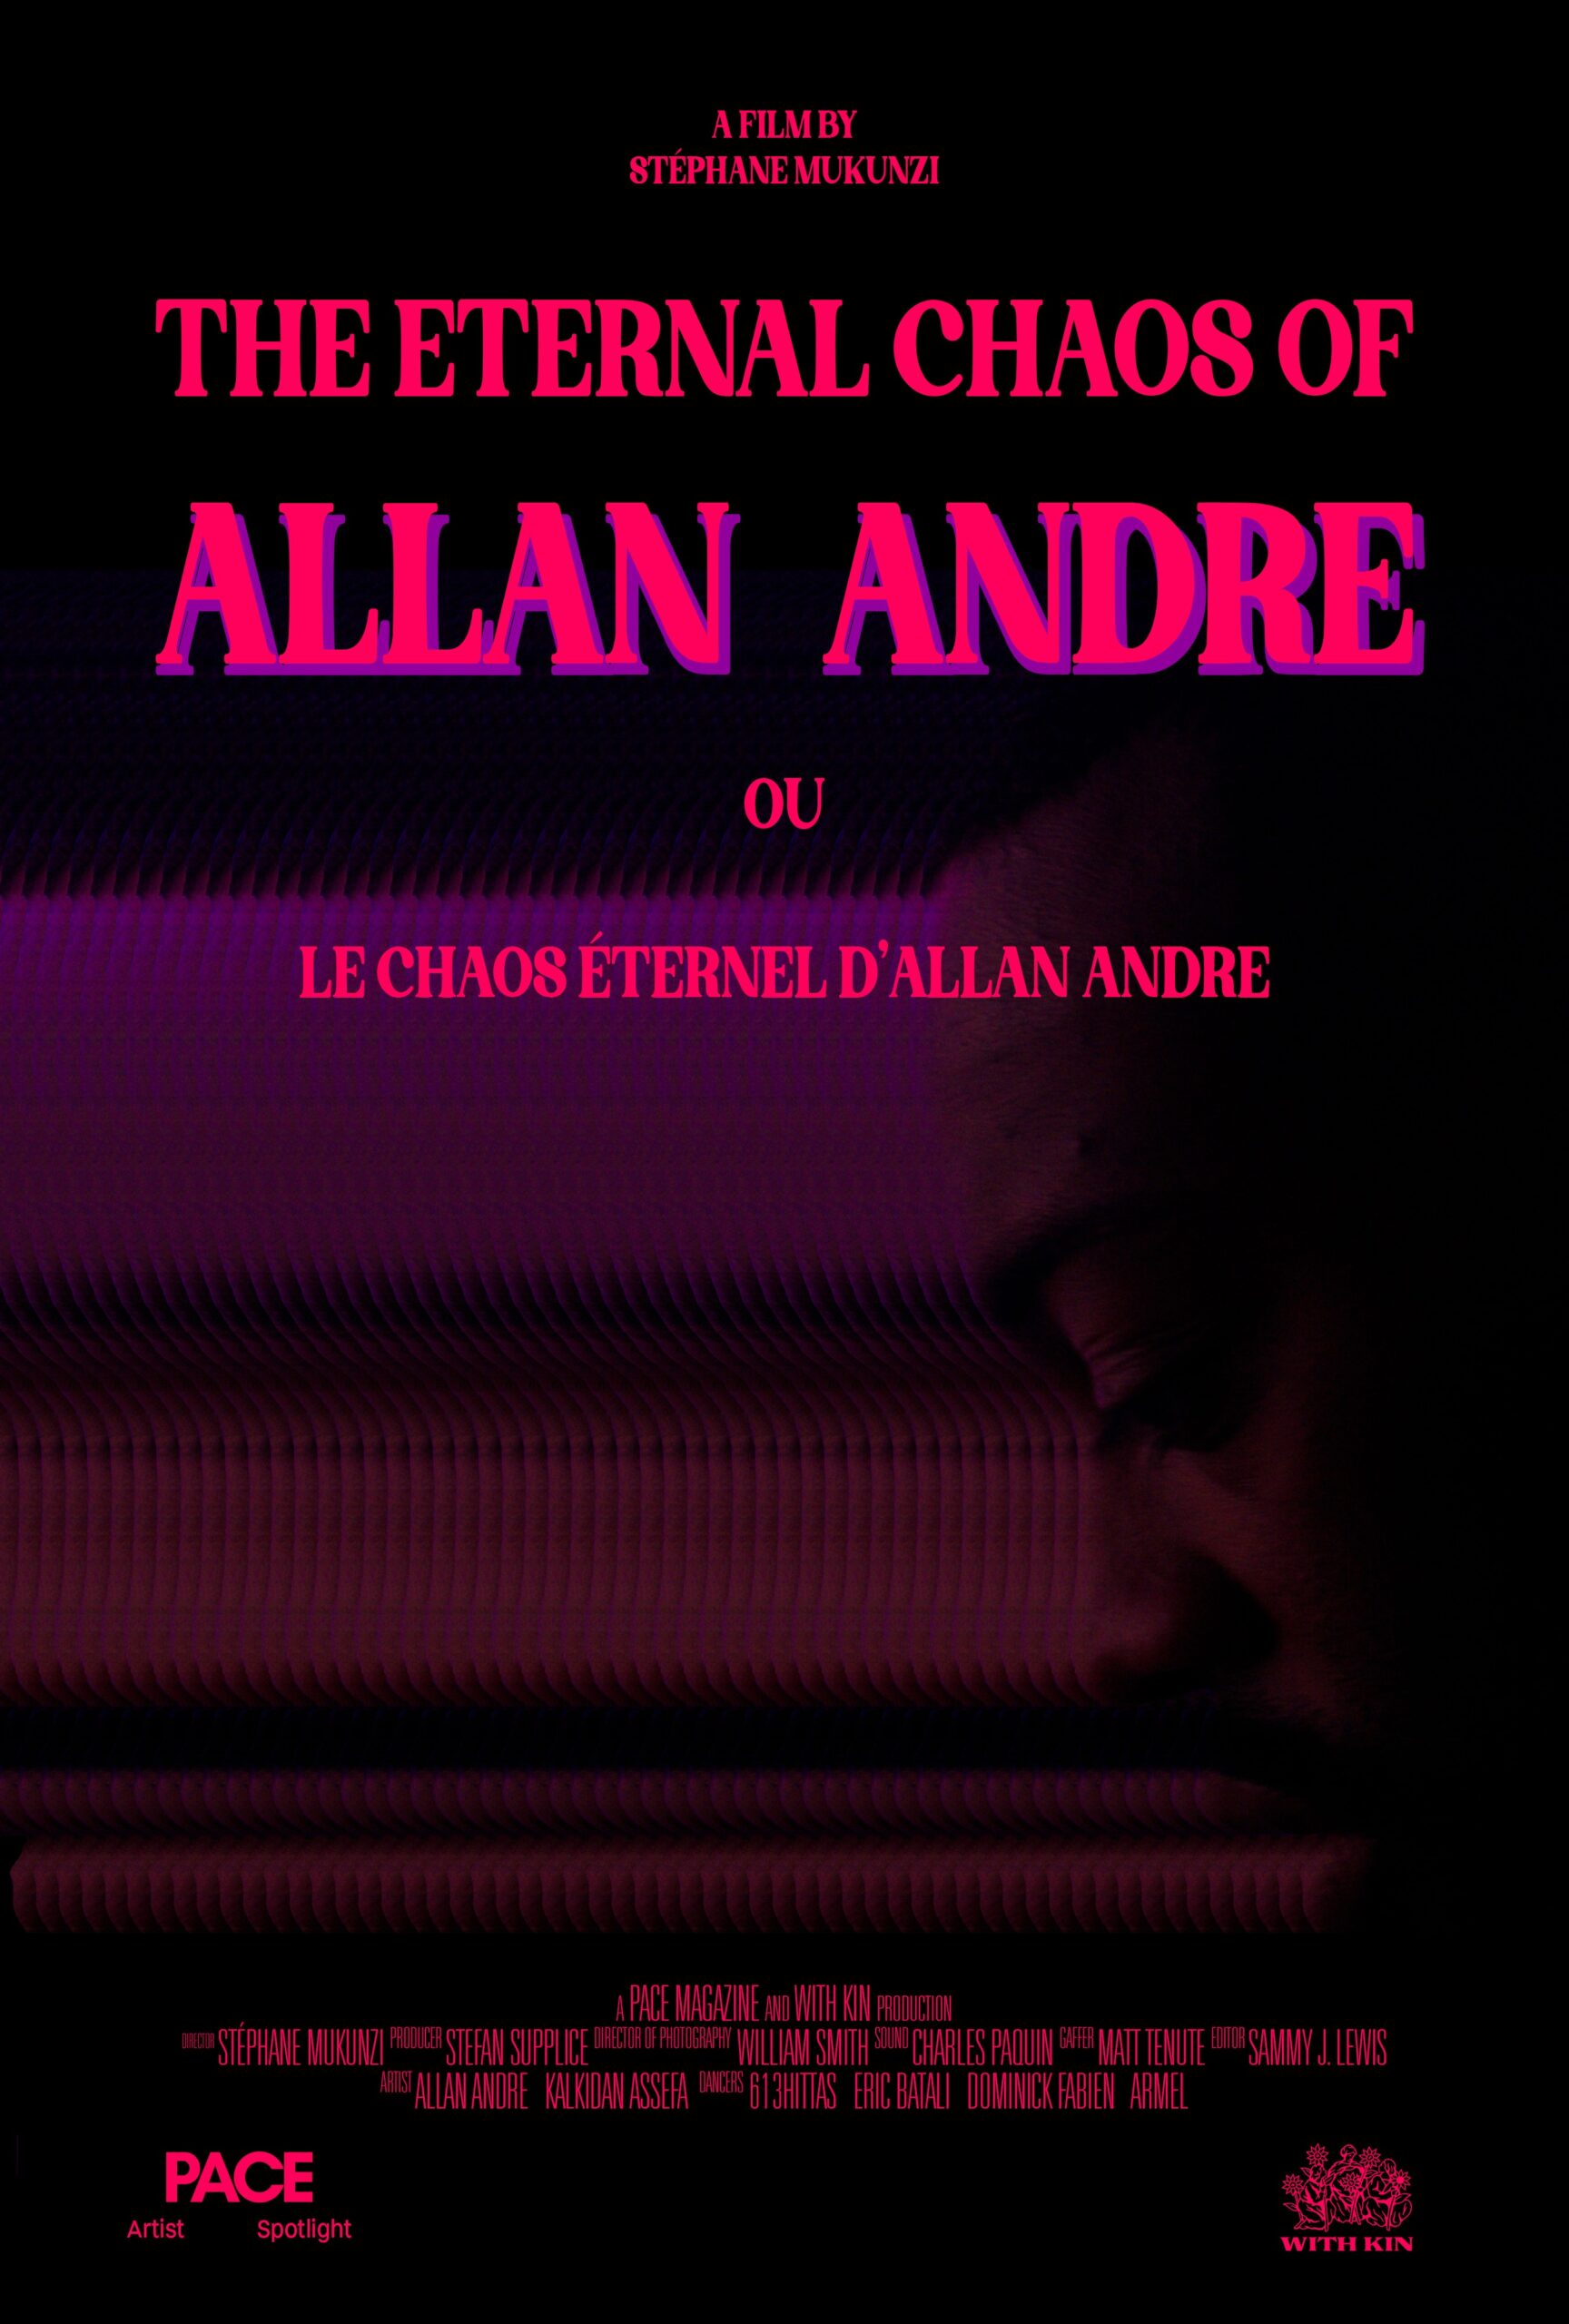 The Eternal Chaos of Allan Andre